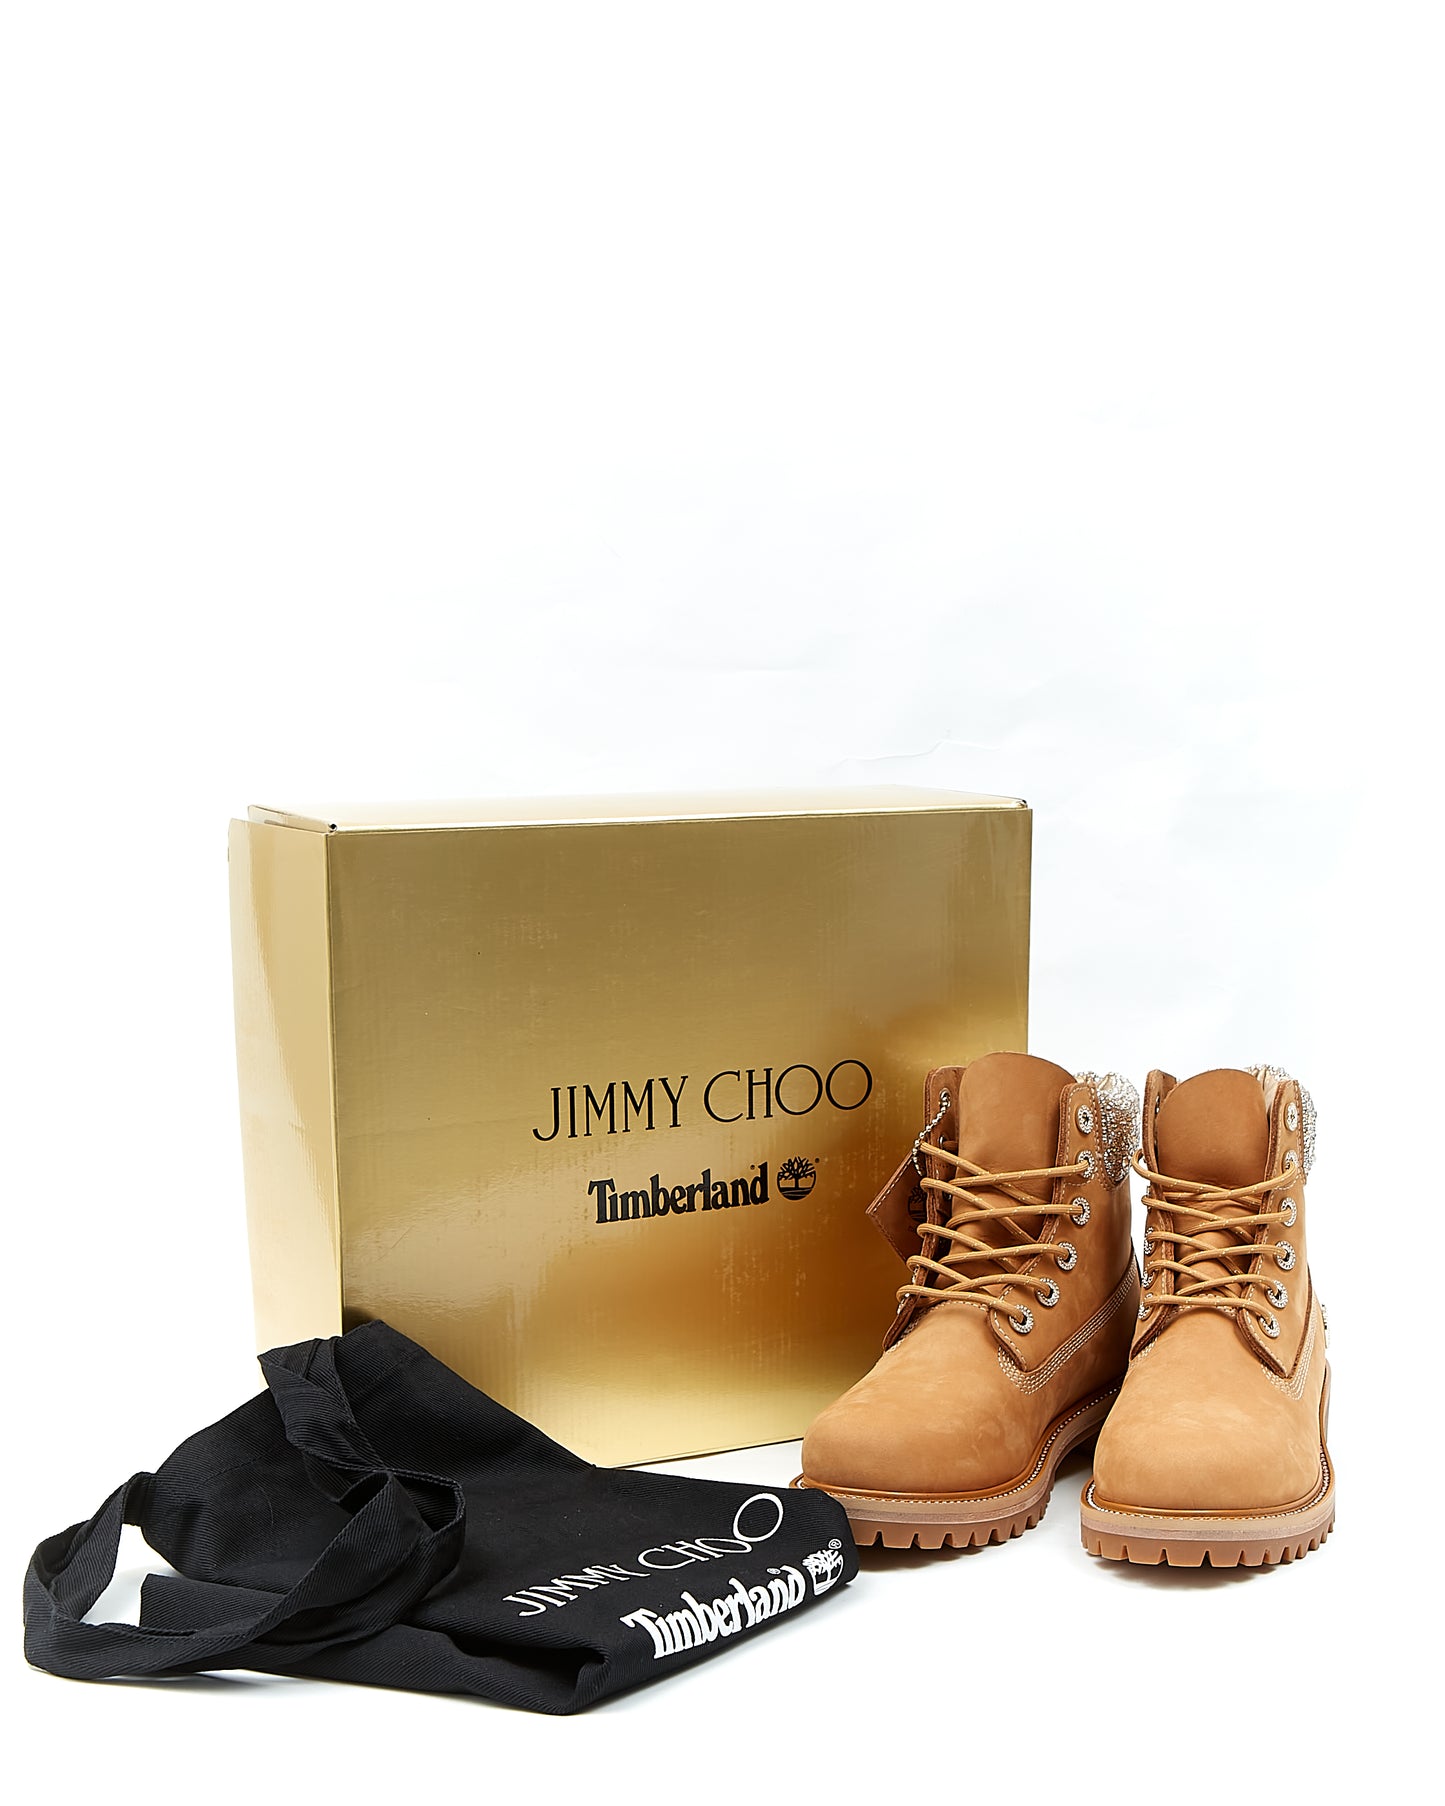 Jimmy Choo x Timberland Suede Crystal Embellished Combat Boots - 37.5